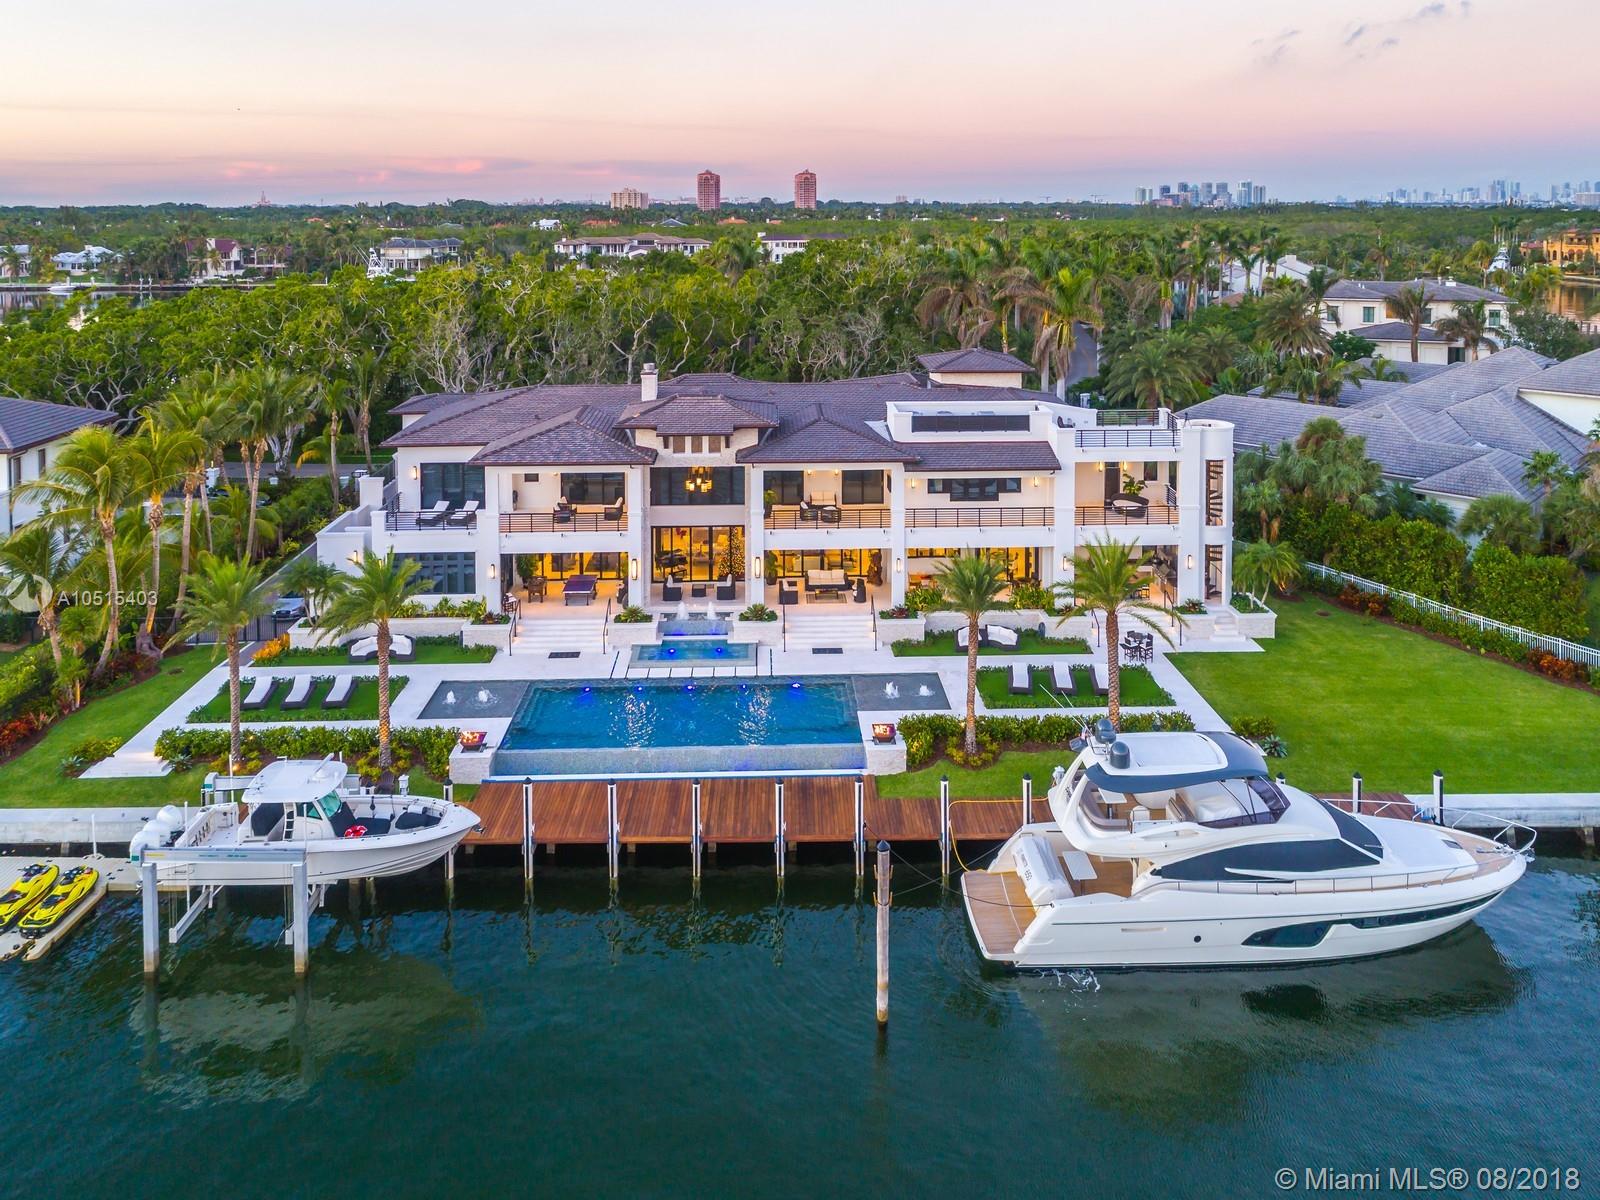 Miami and South Florida's Most Expensive Homes